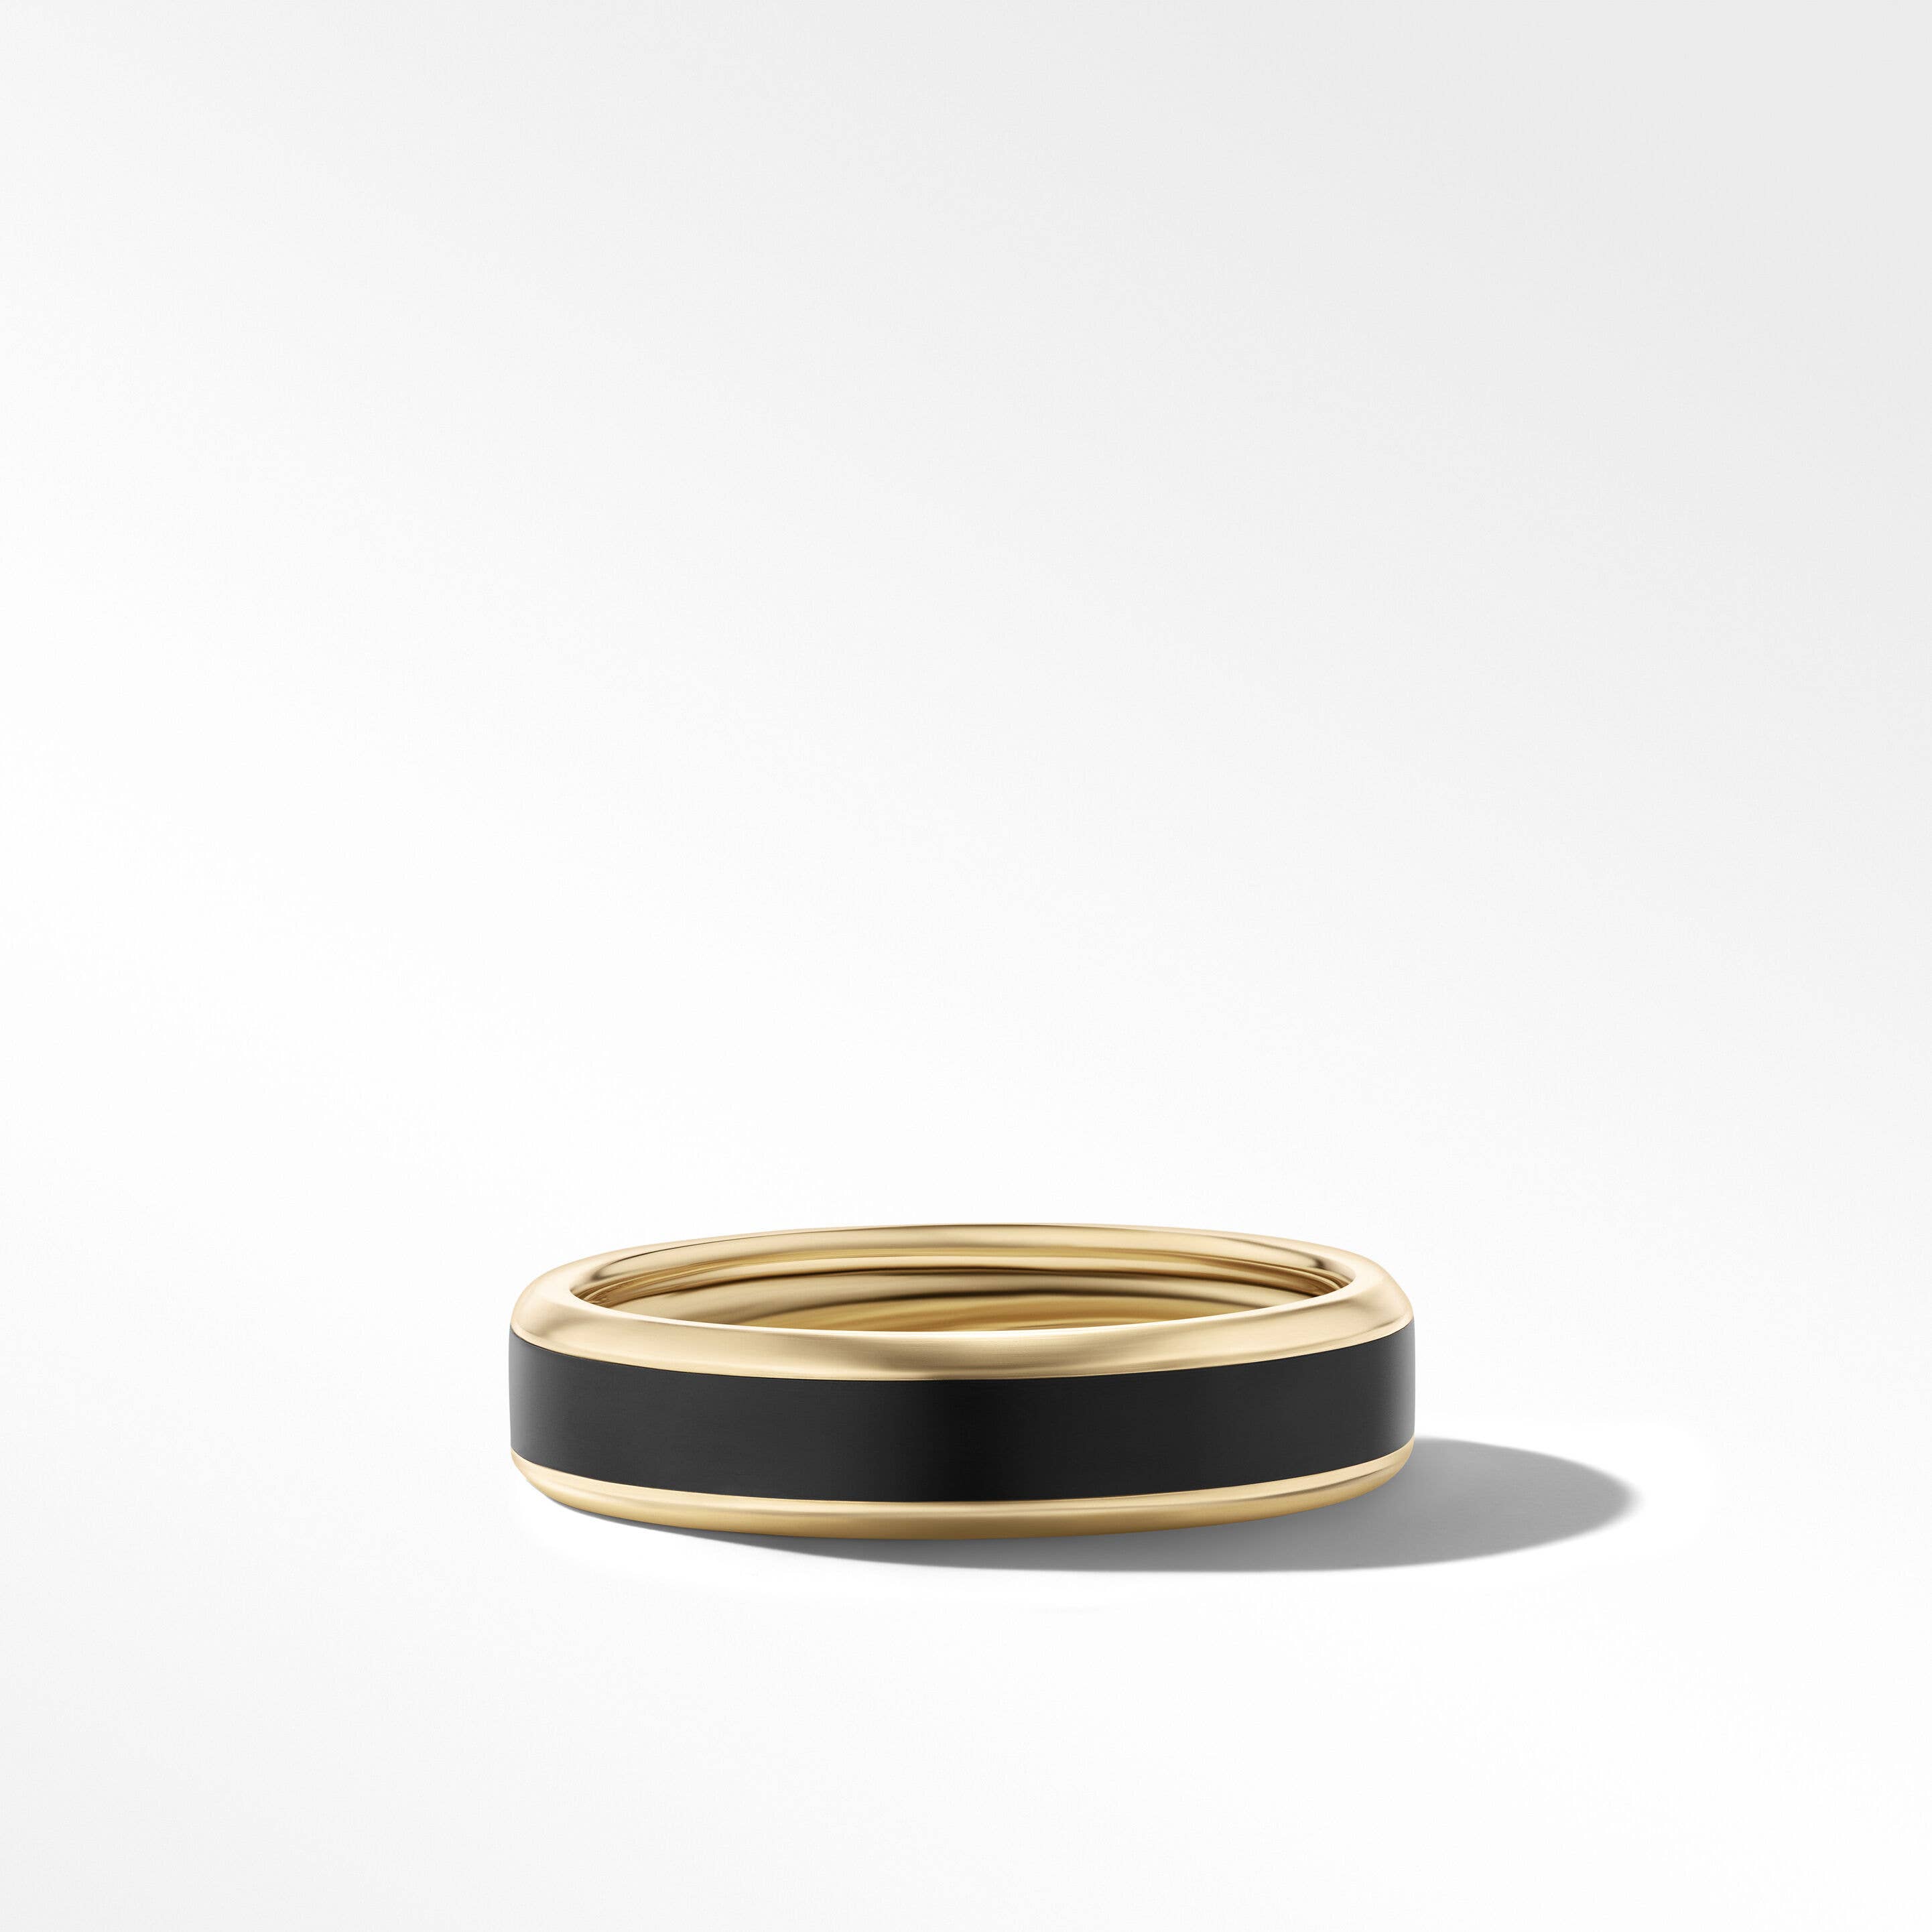 Beveled Band Ring in 18K Yellow Gold with Black Titanium